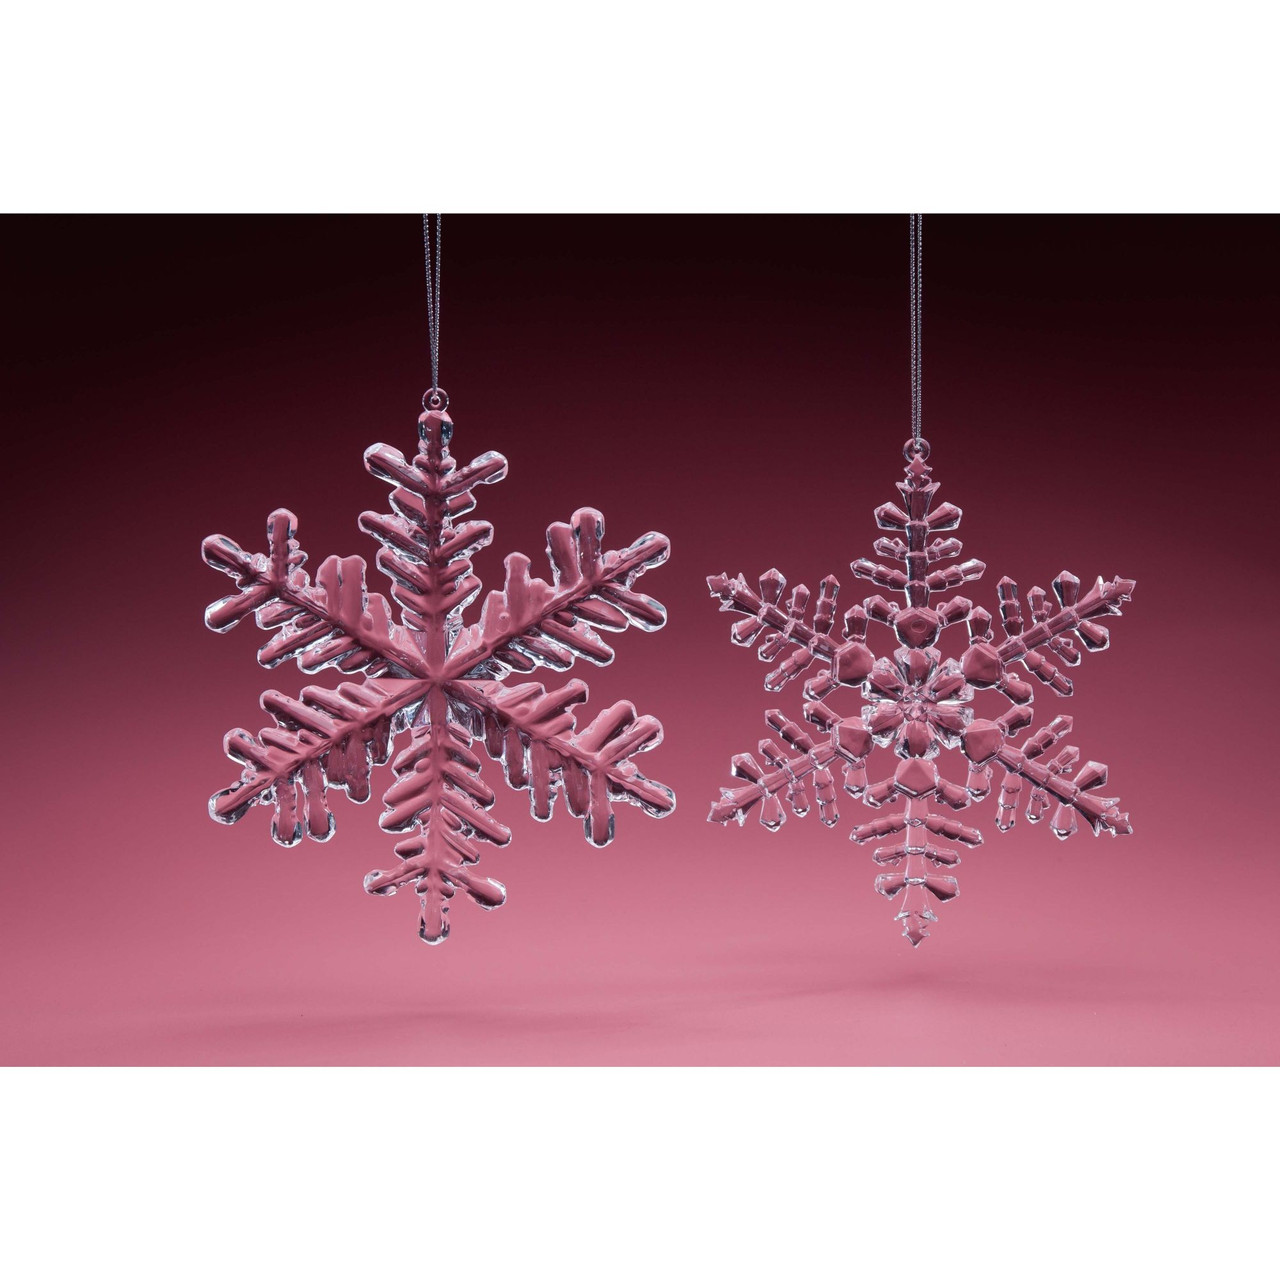 15 Pack Christmas Hanging Snowflakes Decorations 3D Iridescent